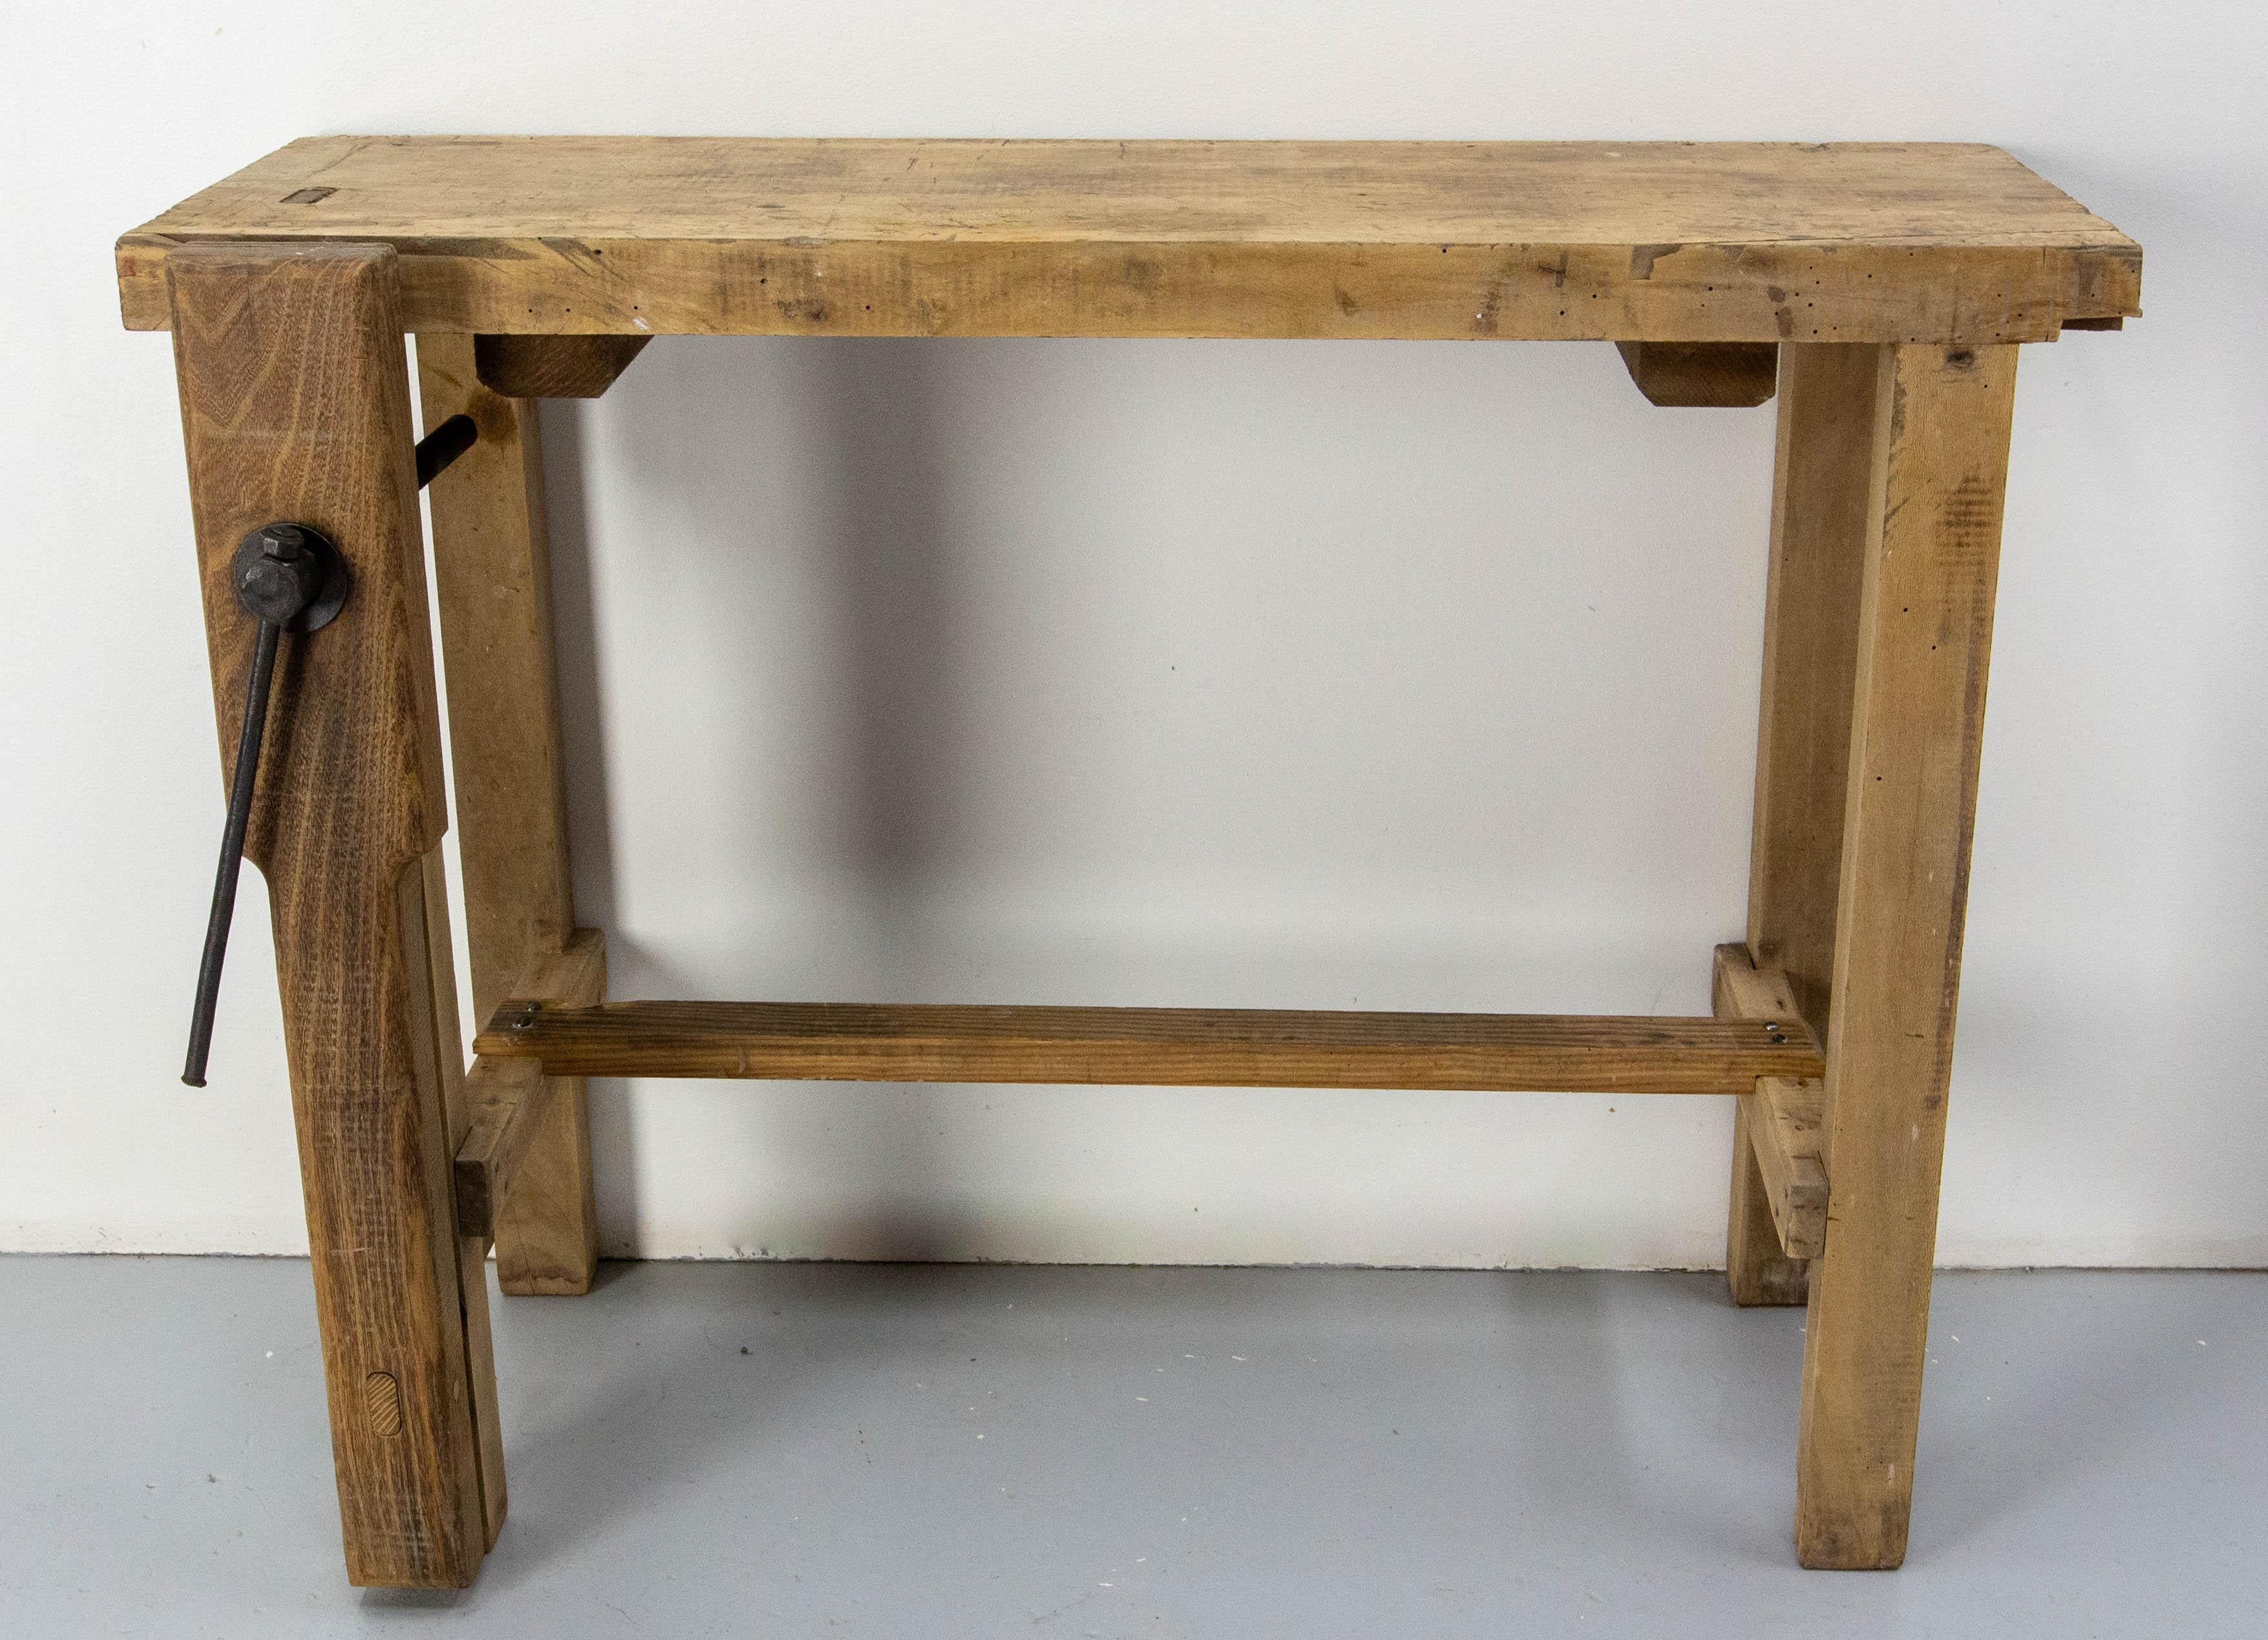 French work bench made circa 1950.
This carpenter work table is perfect to be used in an entry and in a part of a room as a console with character.
The nicks, scratches, dents, cuts, tell the story of the many objects made on this workbench.

Good